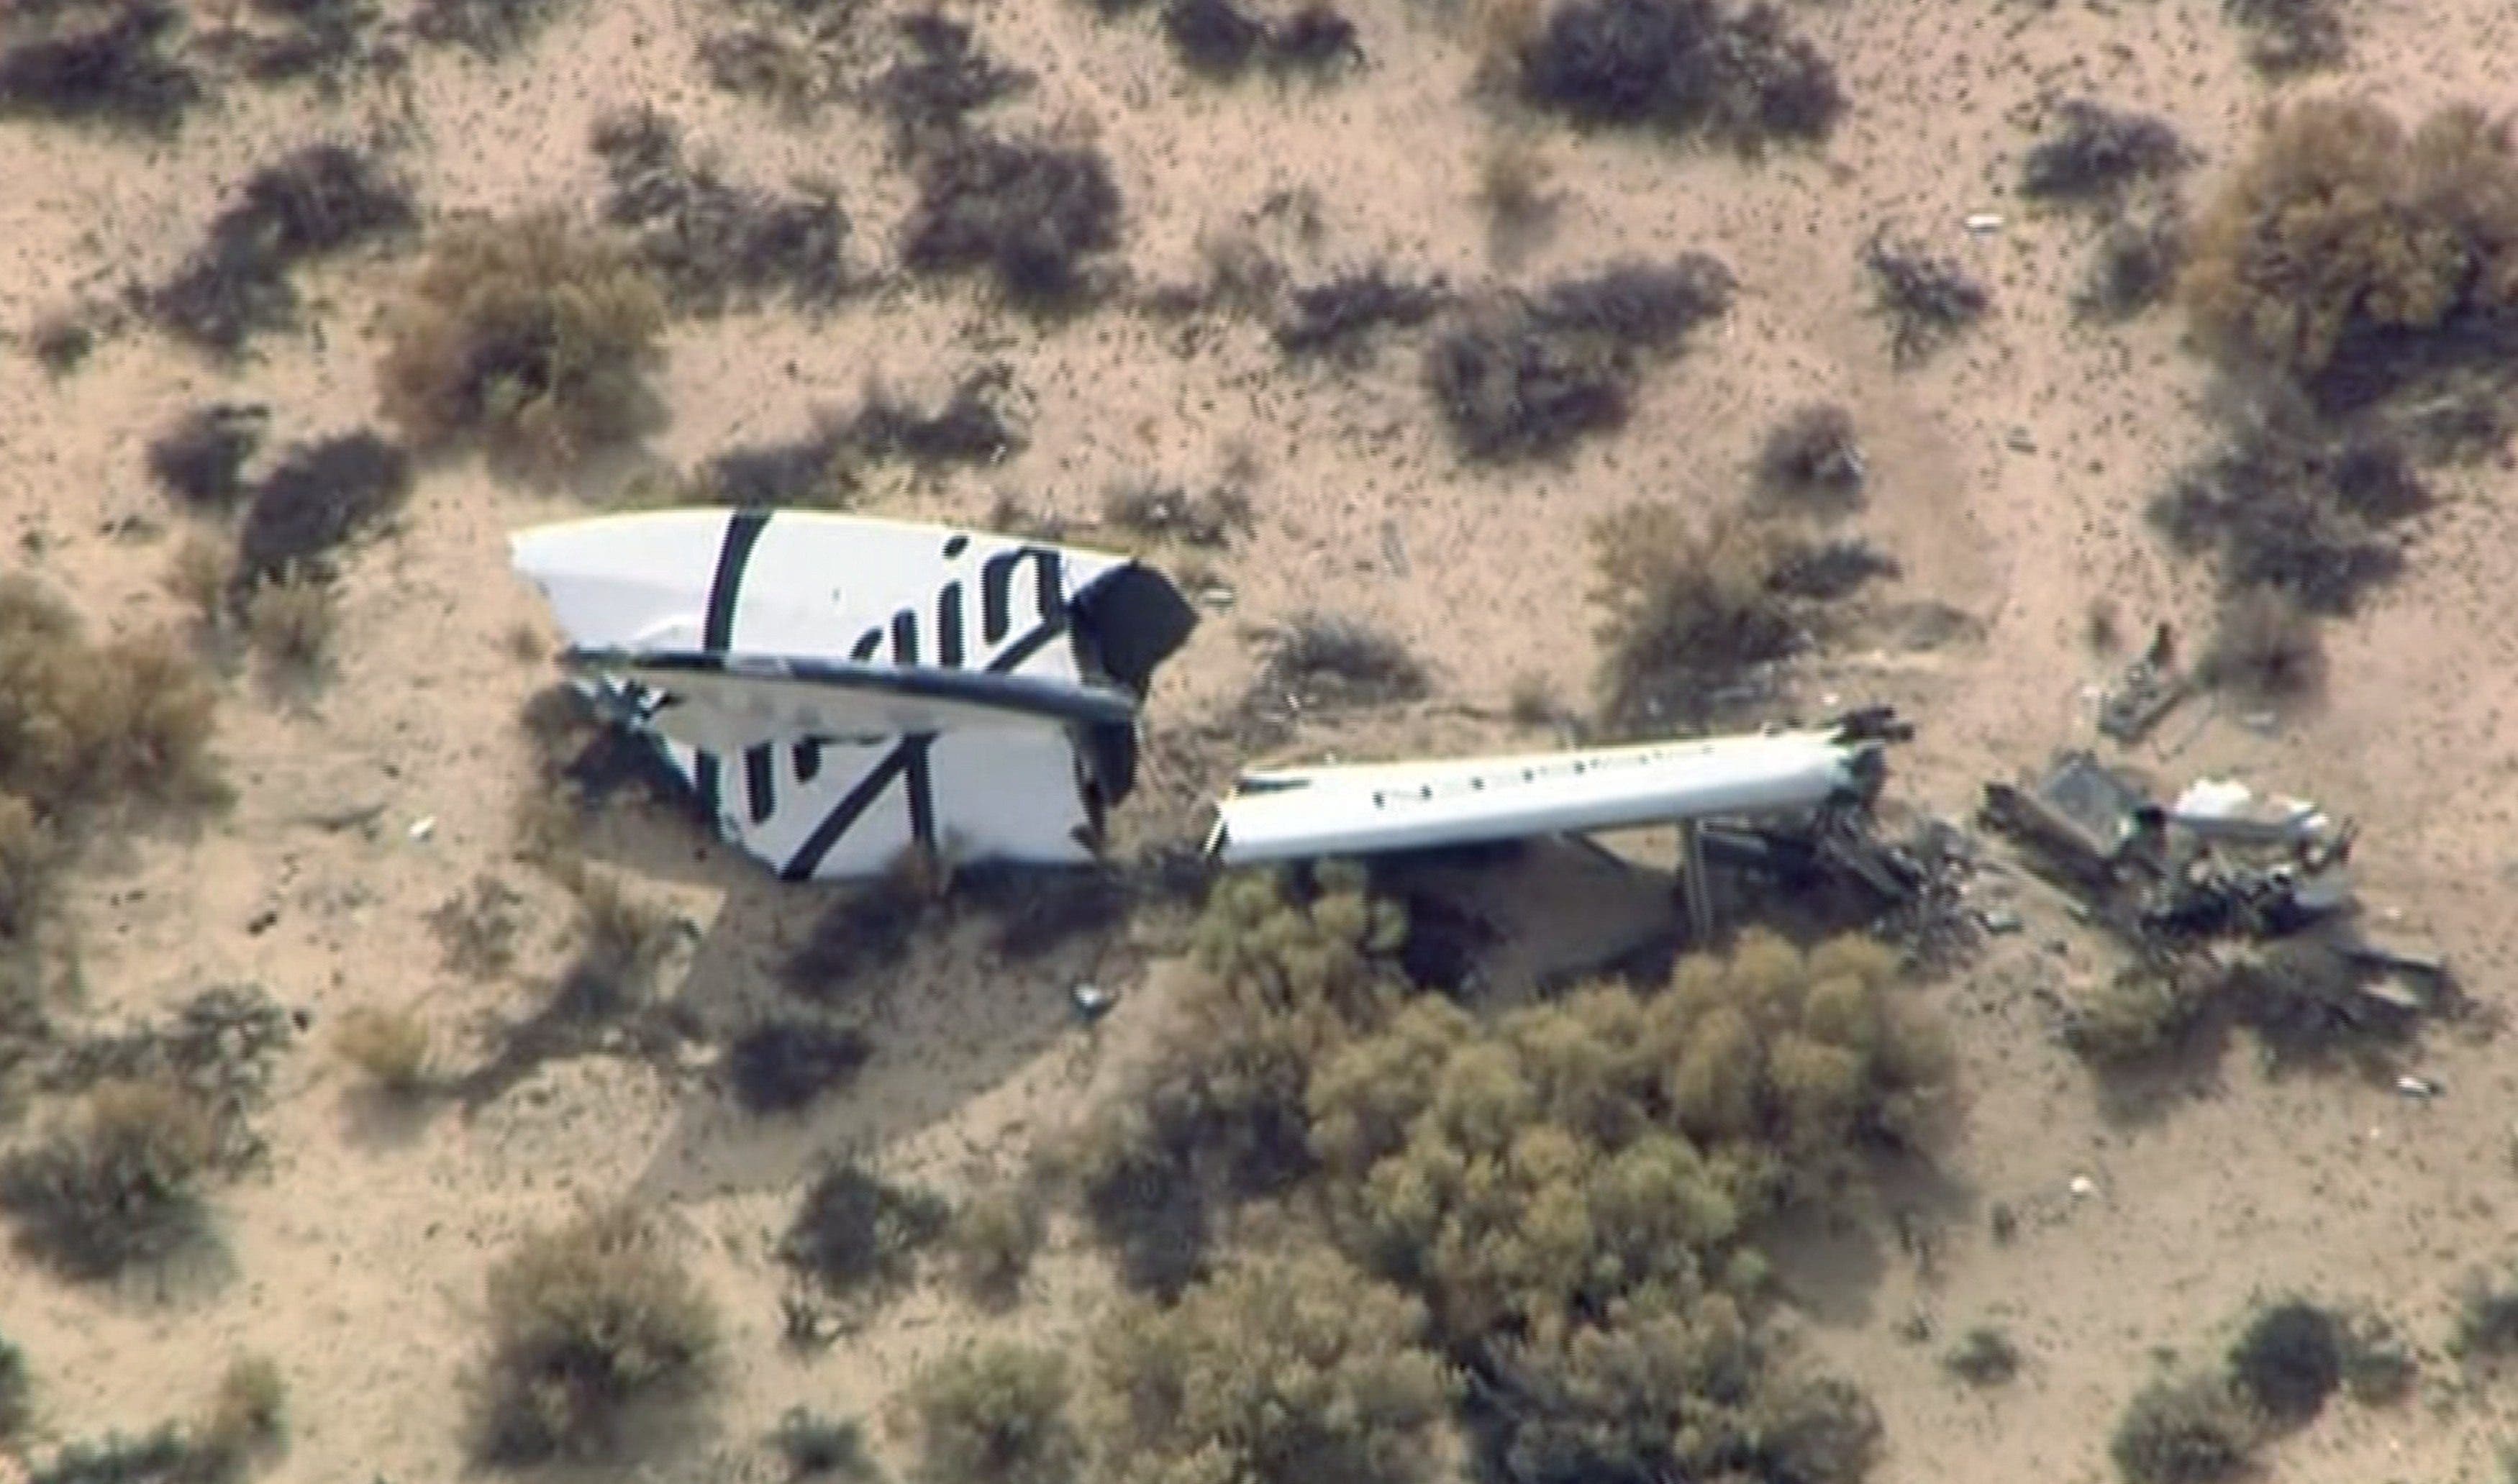 Wreckage from Virgin Galactic's SpaceShipTwo is shown in this still image captured from KNBC video footage from Mojave, California October 31, 2014. (Reuters)